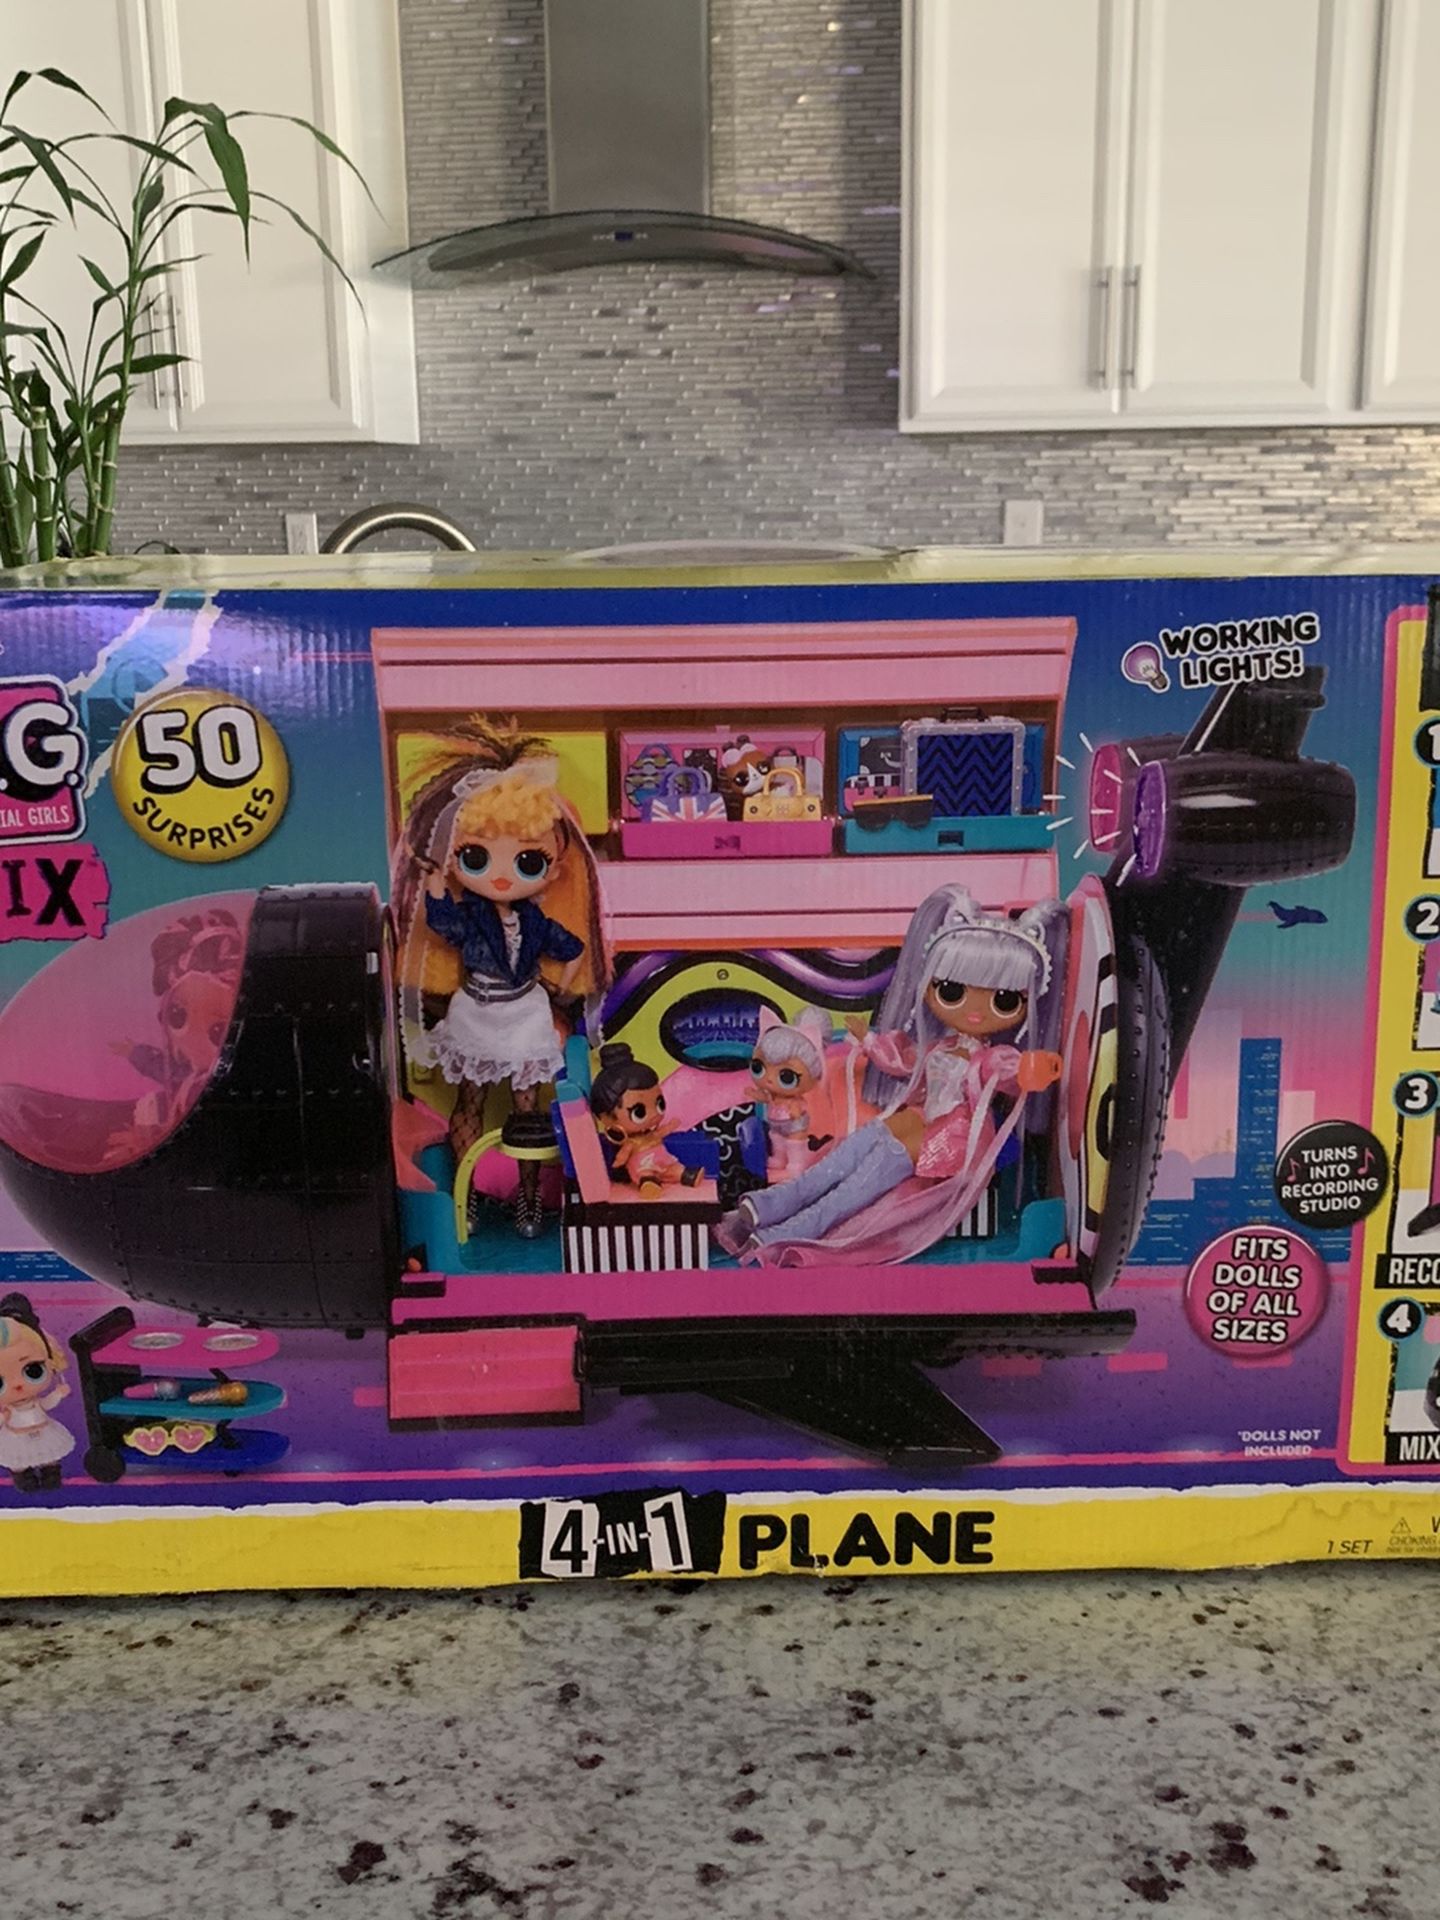 New LOL Surprise OMG Remix 4-in-1 Plane Playset with Music Recording Studio, Mixing Booth